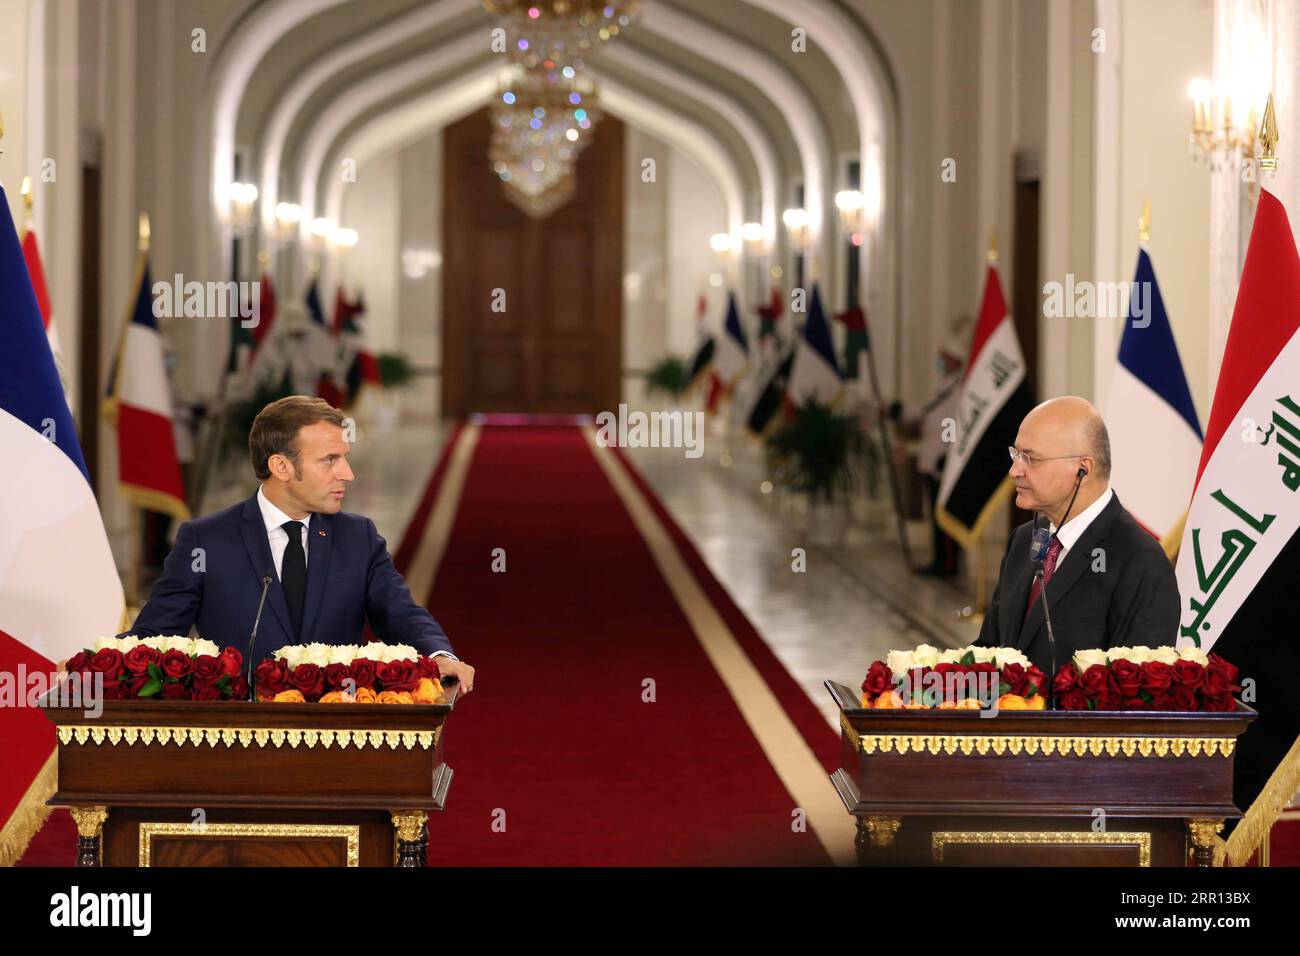 Bilder des Jahres 2020, News 09 September News Themen der Woche KW36 News Bilder des Tages 200902 -- BAGHDAD, Sept. 2, 2020  -- French President Emmanuel Macron L and Iraqi President Barham Salih attend a joint press conference in Baghdad, Iraq, on Sept. 2, 2020. Iraqi President Barham Salih on Wednesday met with his French counterpart Emmanuel Macron in Baghdad to discuss bilateral ties and the war against the Islamic State IS group.  IRAQ-BAGHDAD-FRANCE-PRESIDENT-VISIT Xinhua PUBLICATIONxNOTxINxCHN Stock Photo